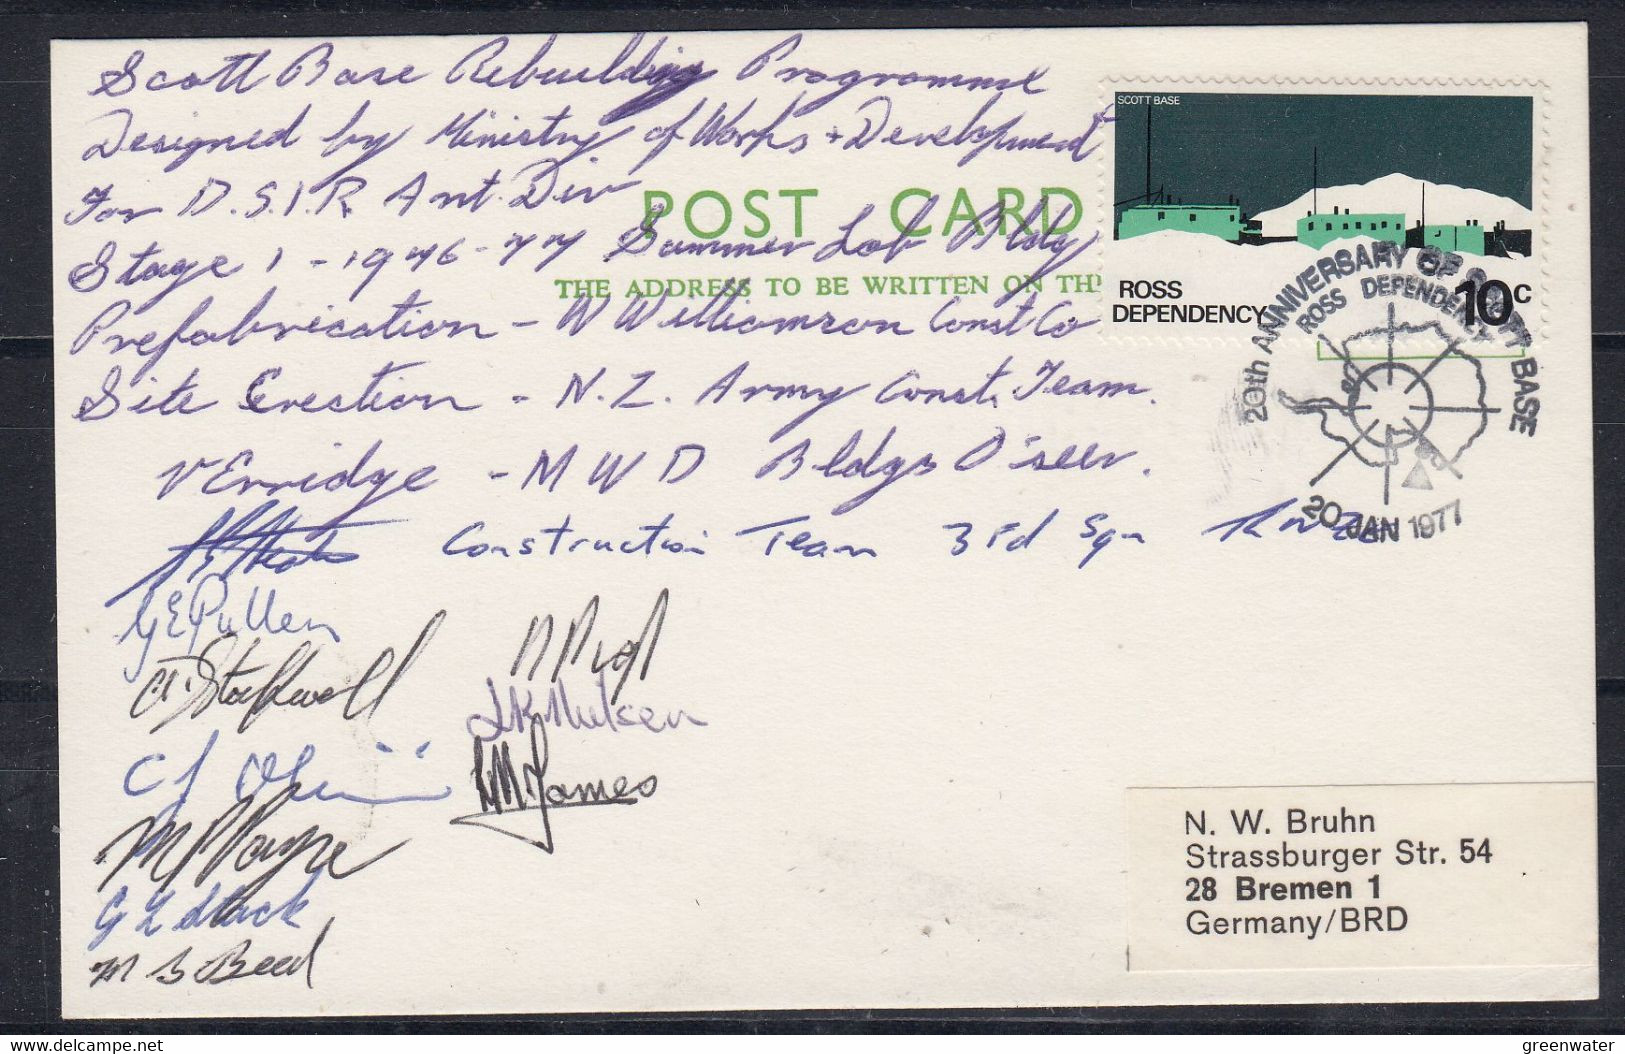 Ross Dependency 1977 Card Scott Base Rebuilding Programme With 10 Signatures Of Members Construction Team (52543) - Lettres & Documents